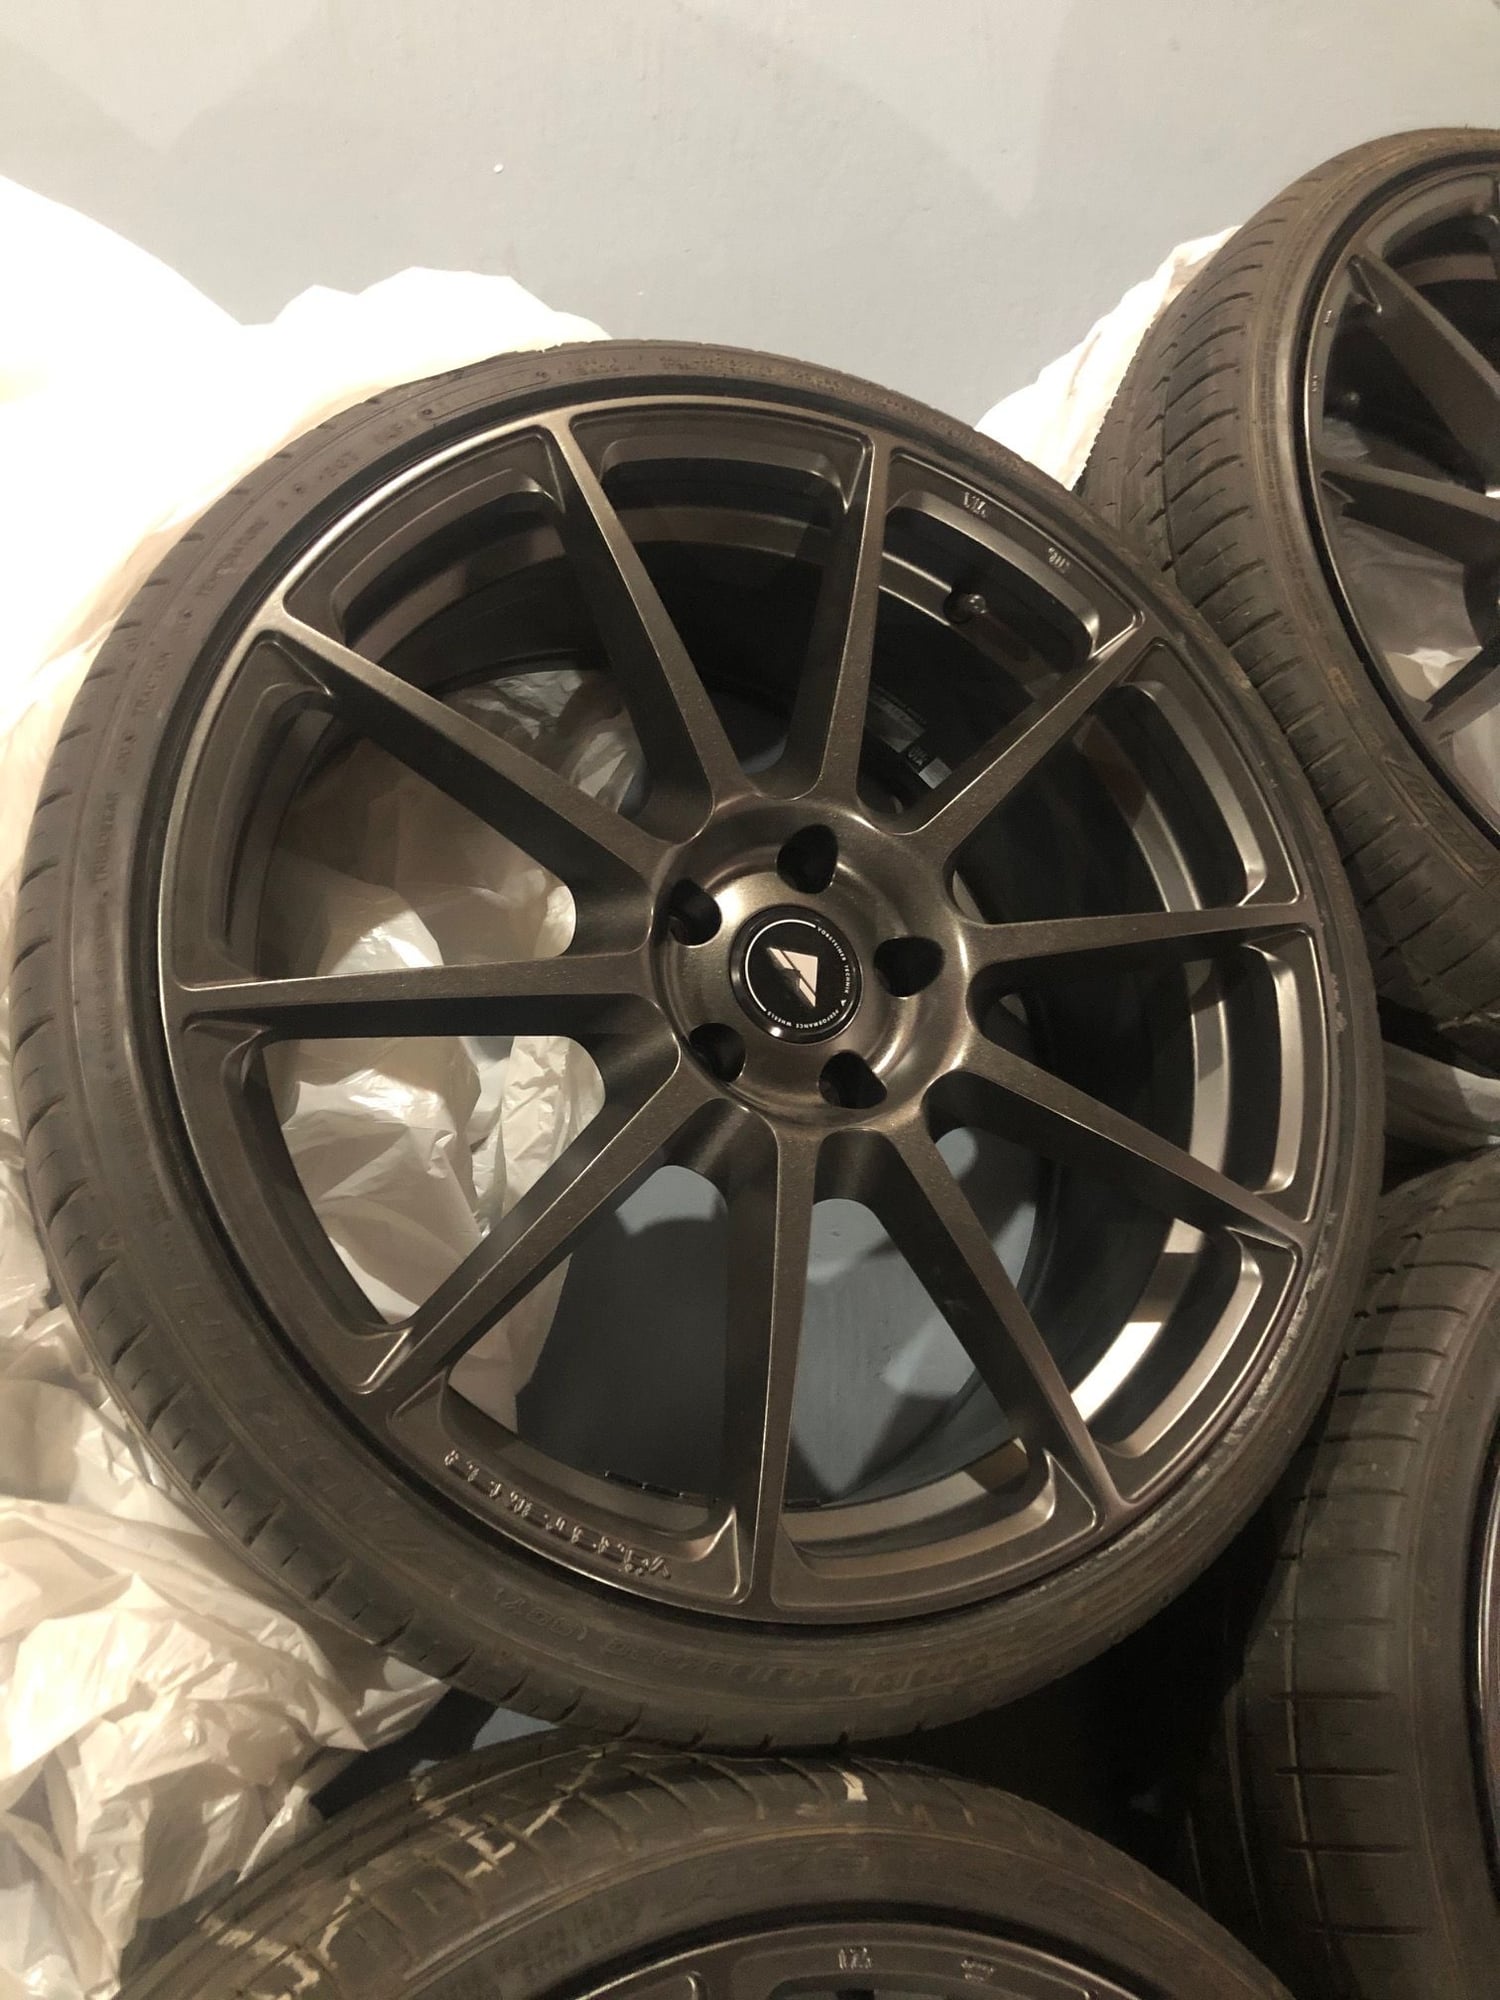 Wheels and Tires/Axles - Vorsteiner V-FF 102 Carbon Graphite 20x9 +35 5x112 - Falken FK510 - Used - 0  All Models - Toronto, ON L3R4T1, Canada